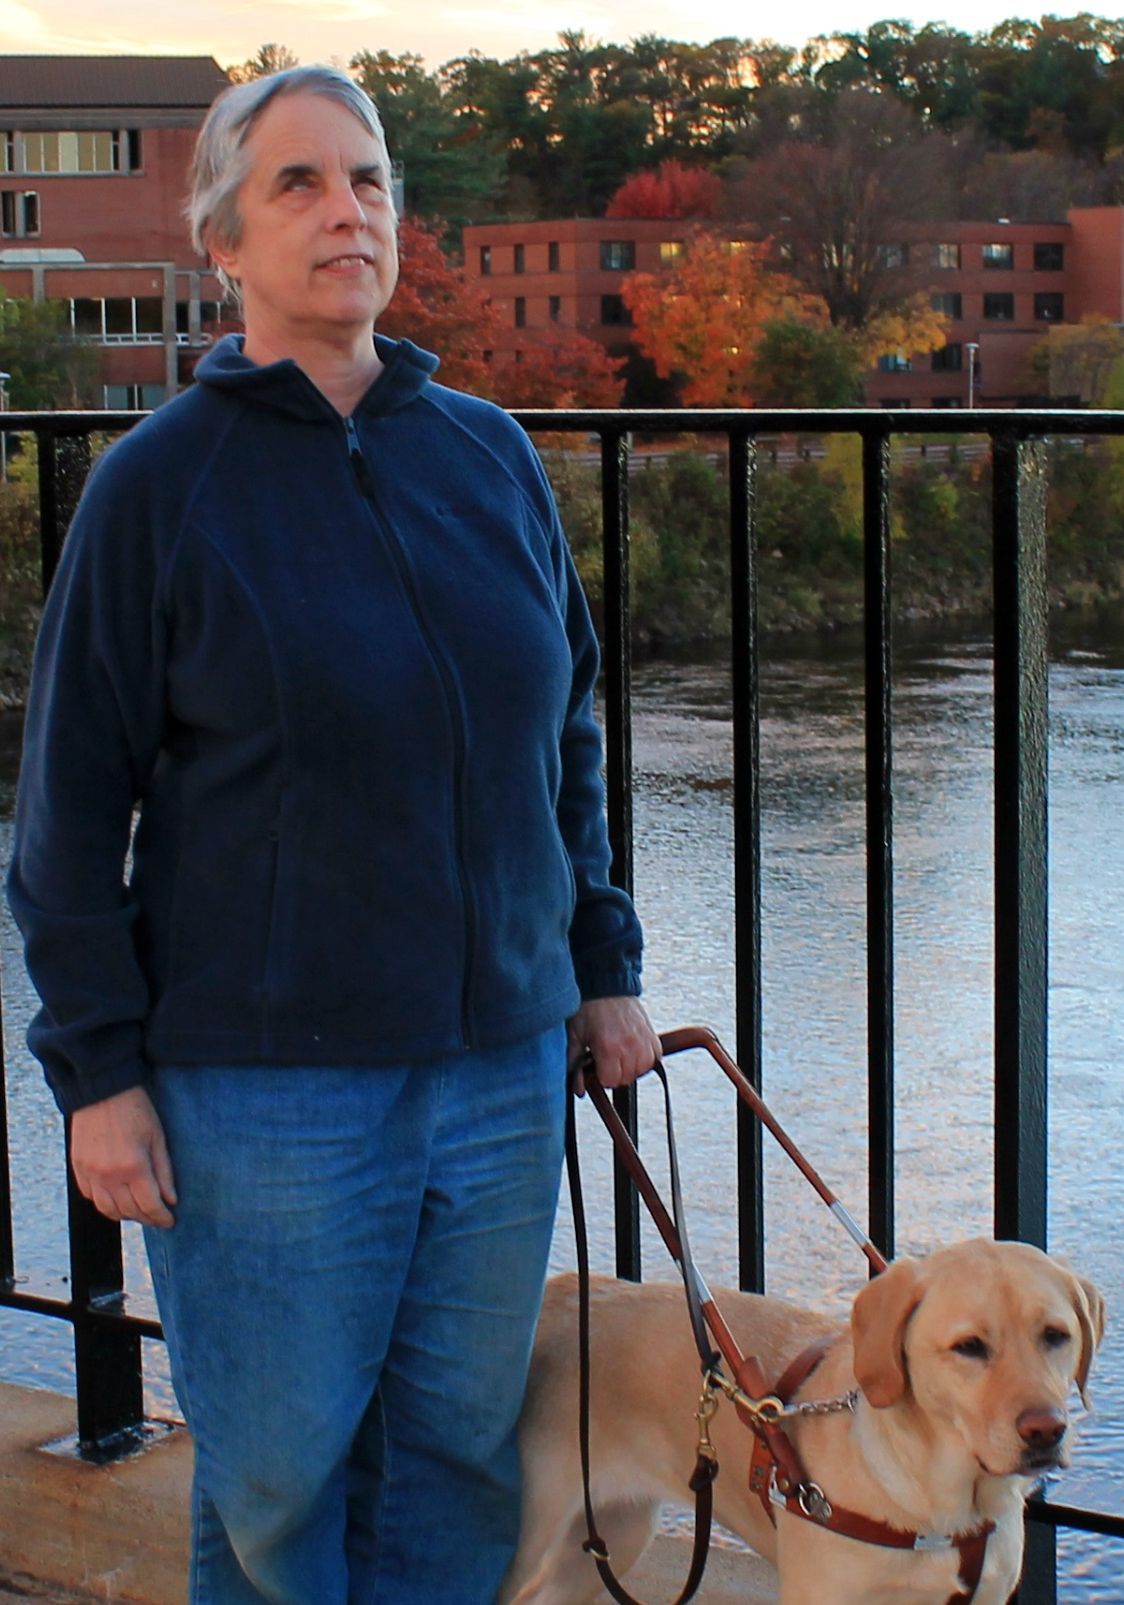 Dr. Kathie pictured with her guide dog on a bridge over a body of water